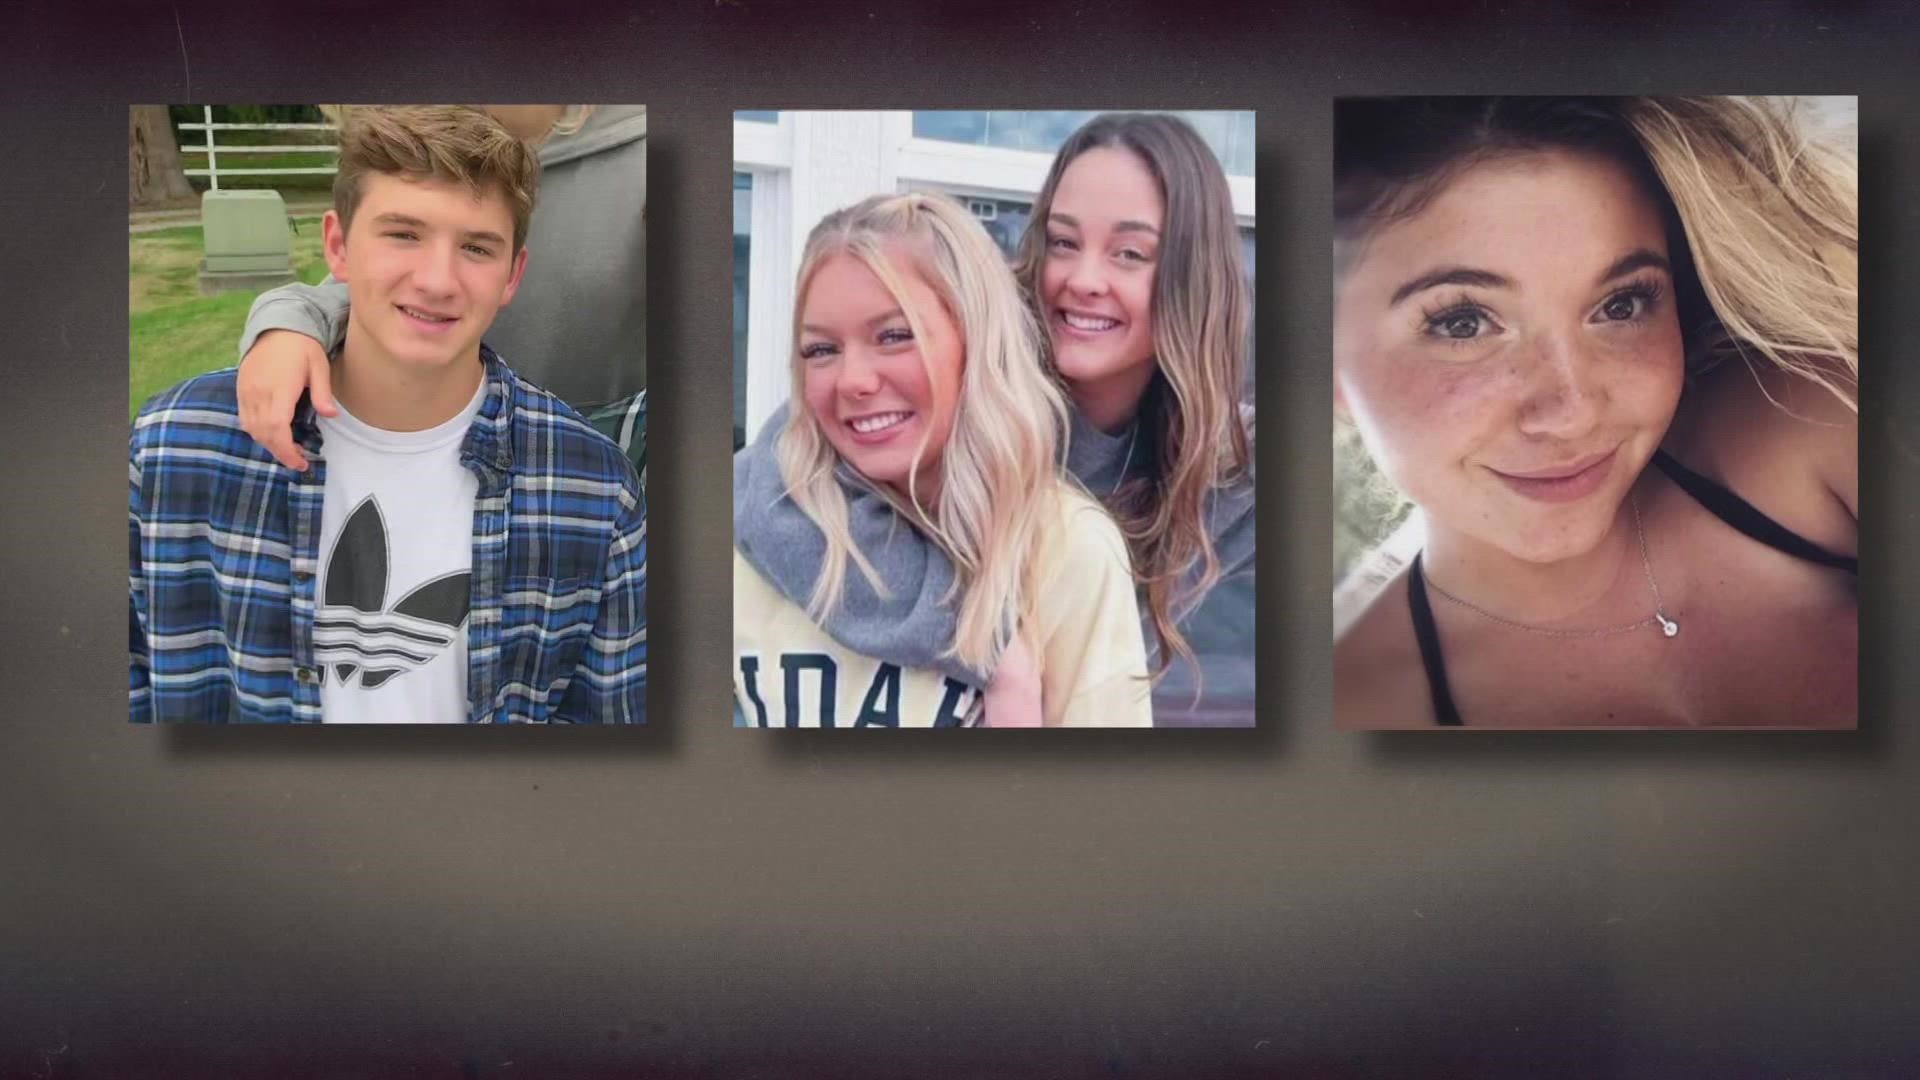 Idaho murders: What we know about University of Idaho students